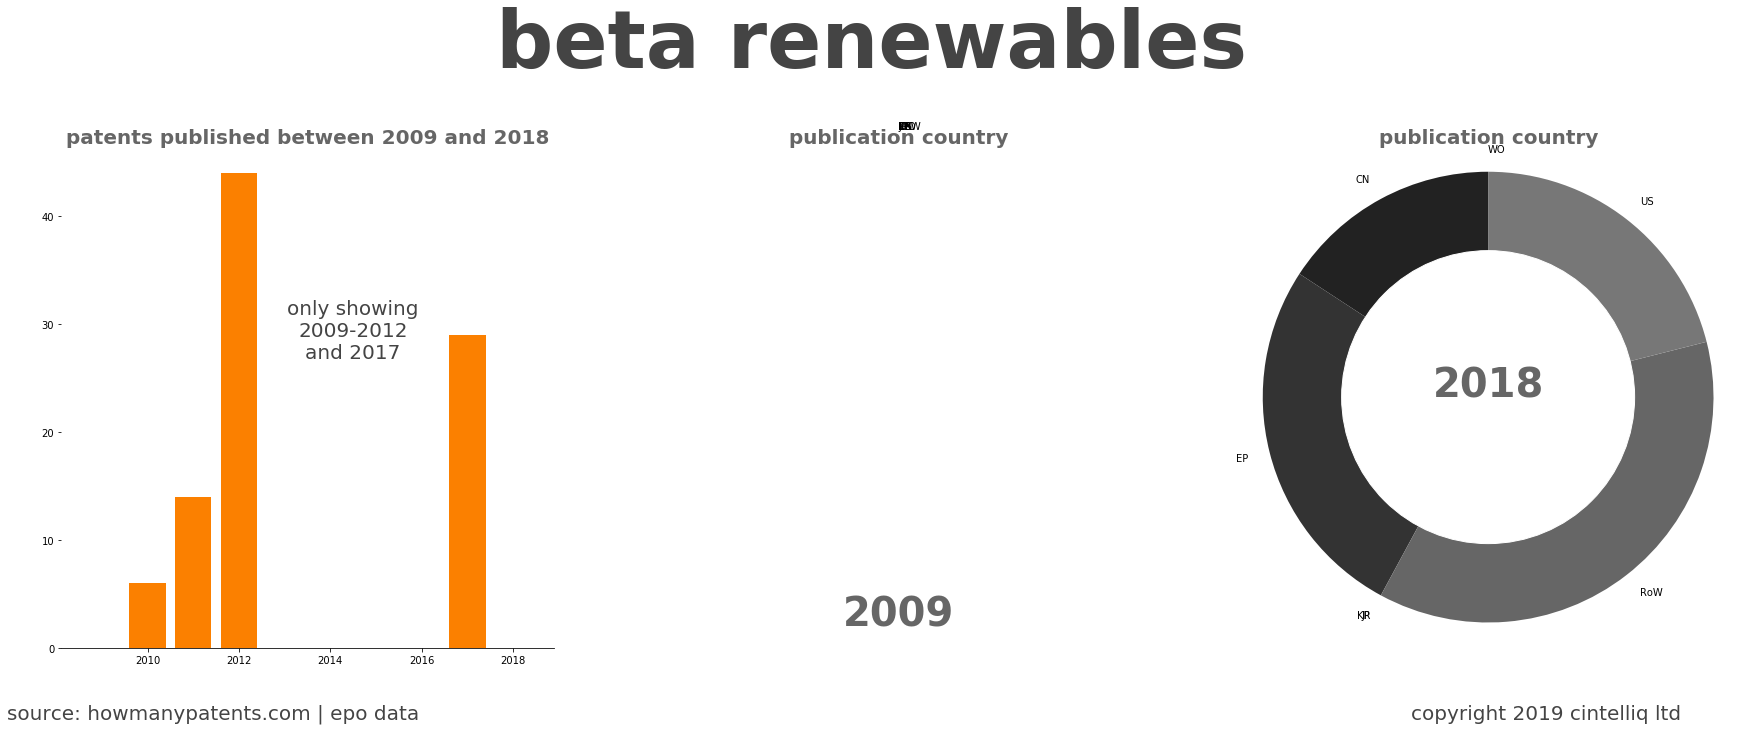 summary of patents for Beta Renewables